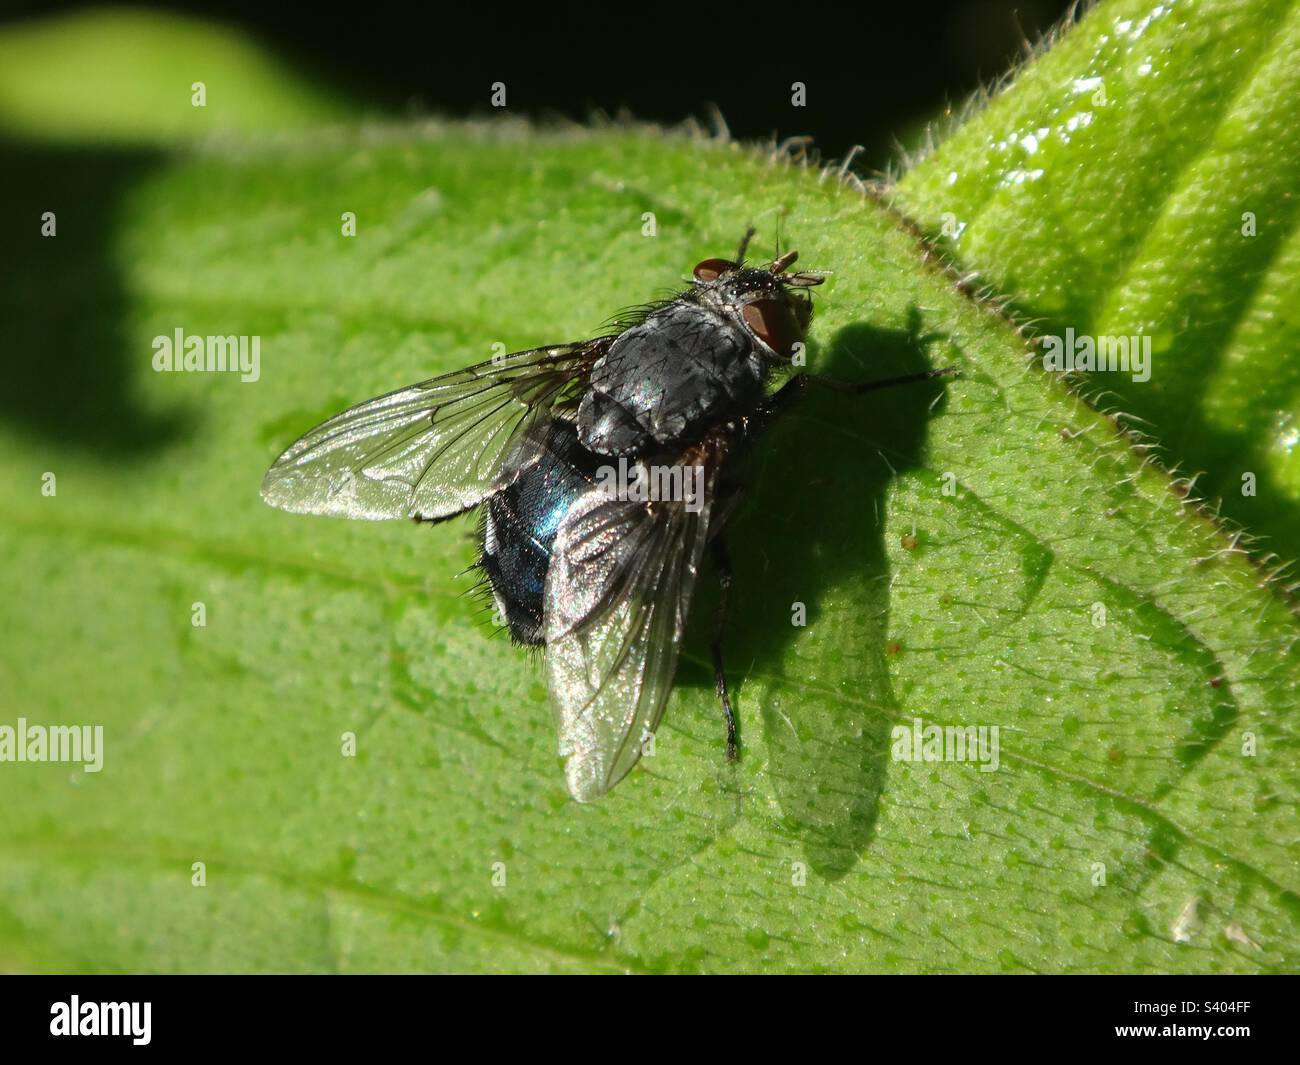 Female blue bottle fly (Calliphora vicina) sitting on a bright green leaf Stock Photo